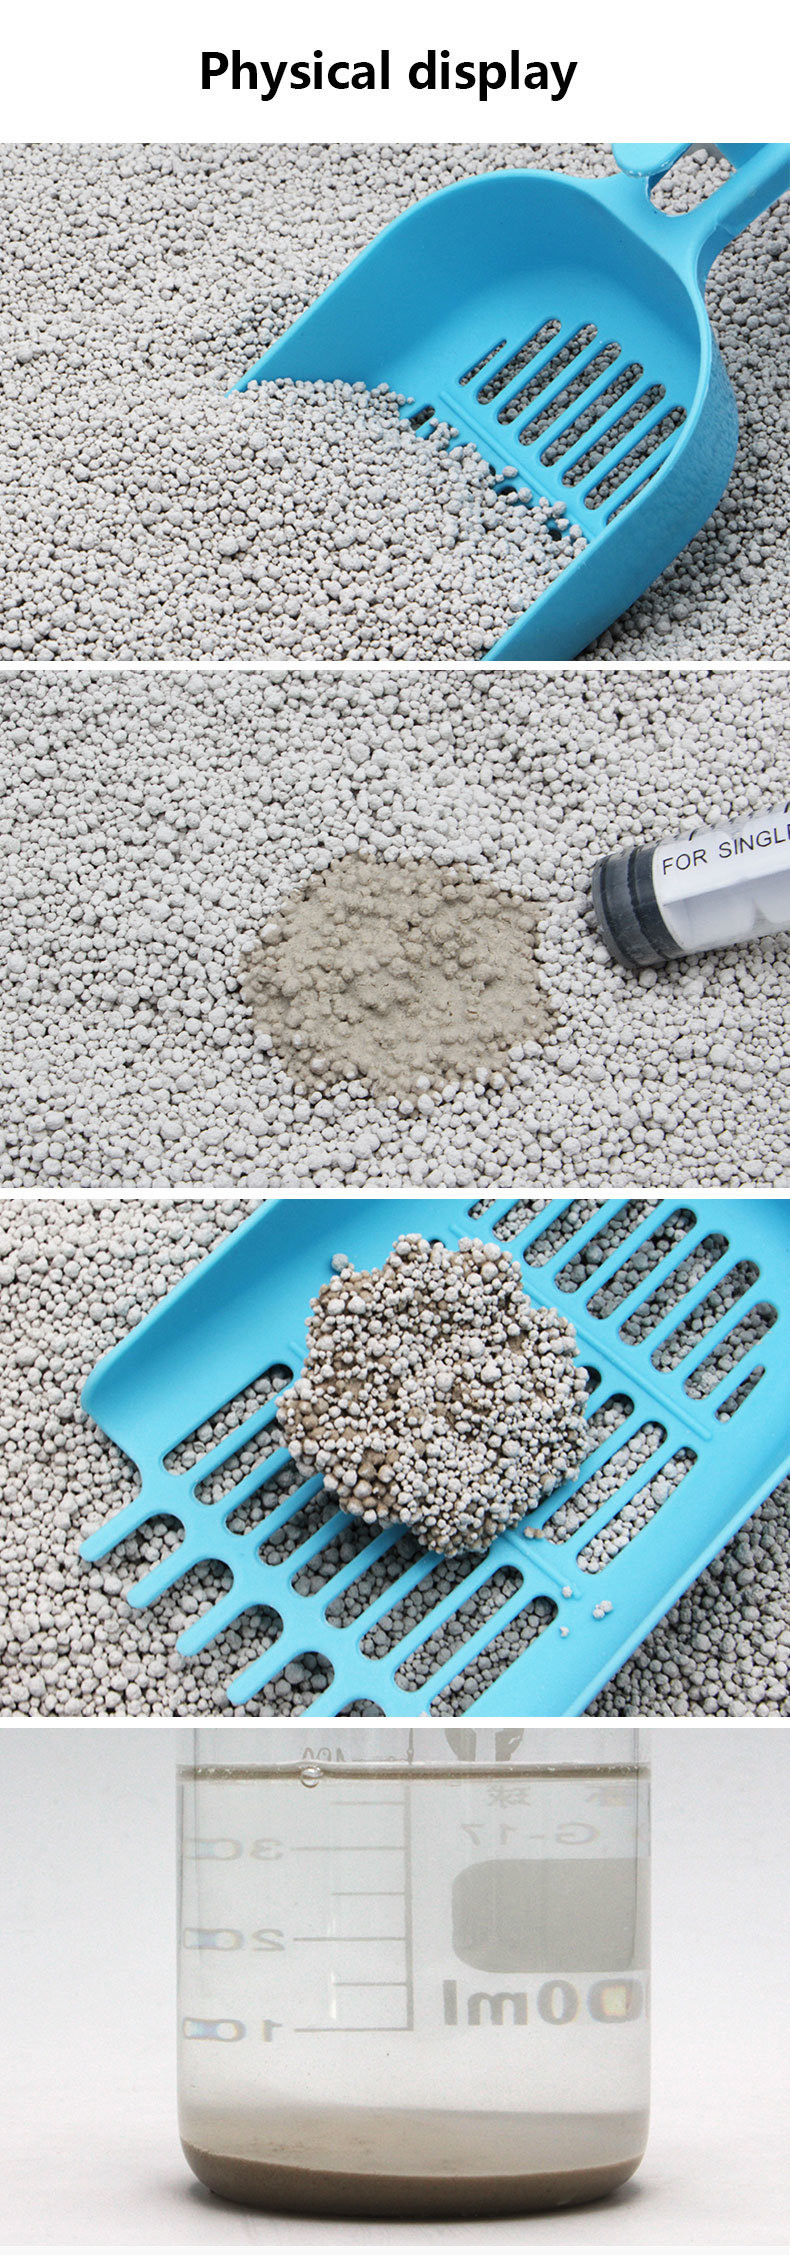 China New Pets Suppy Water Soluble Bentonite Cat Litter Pet Products